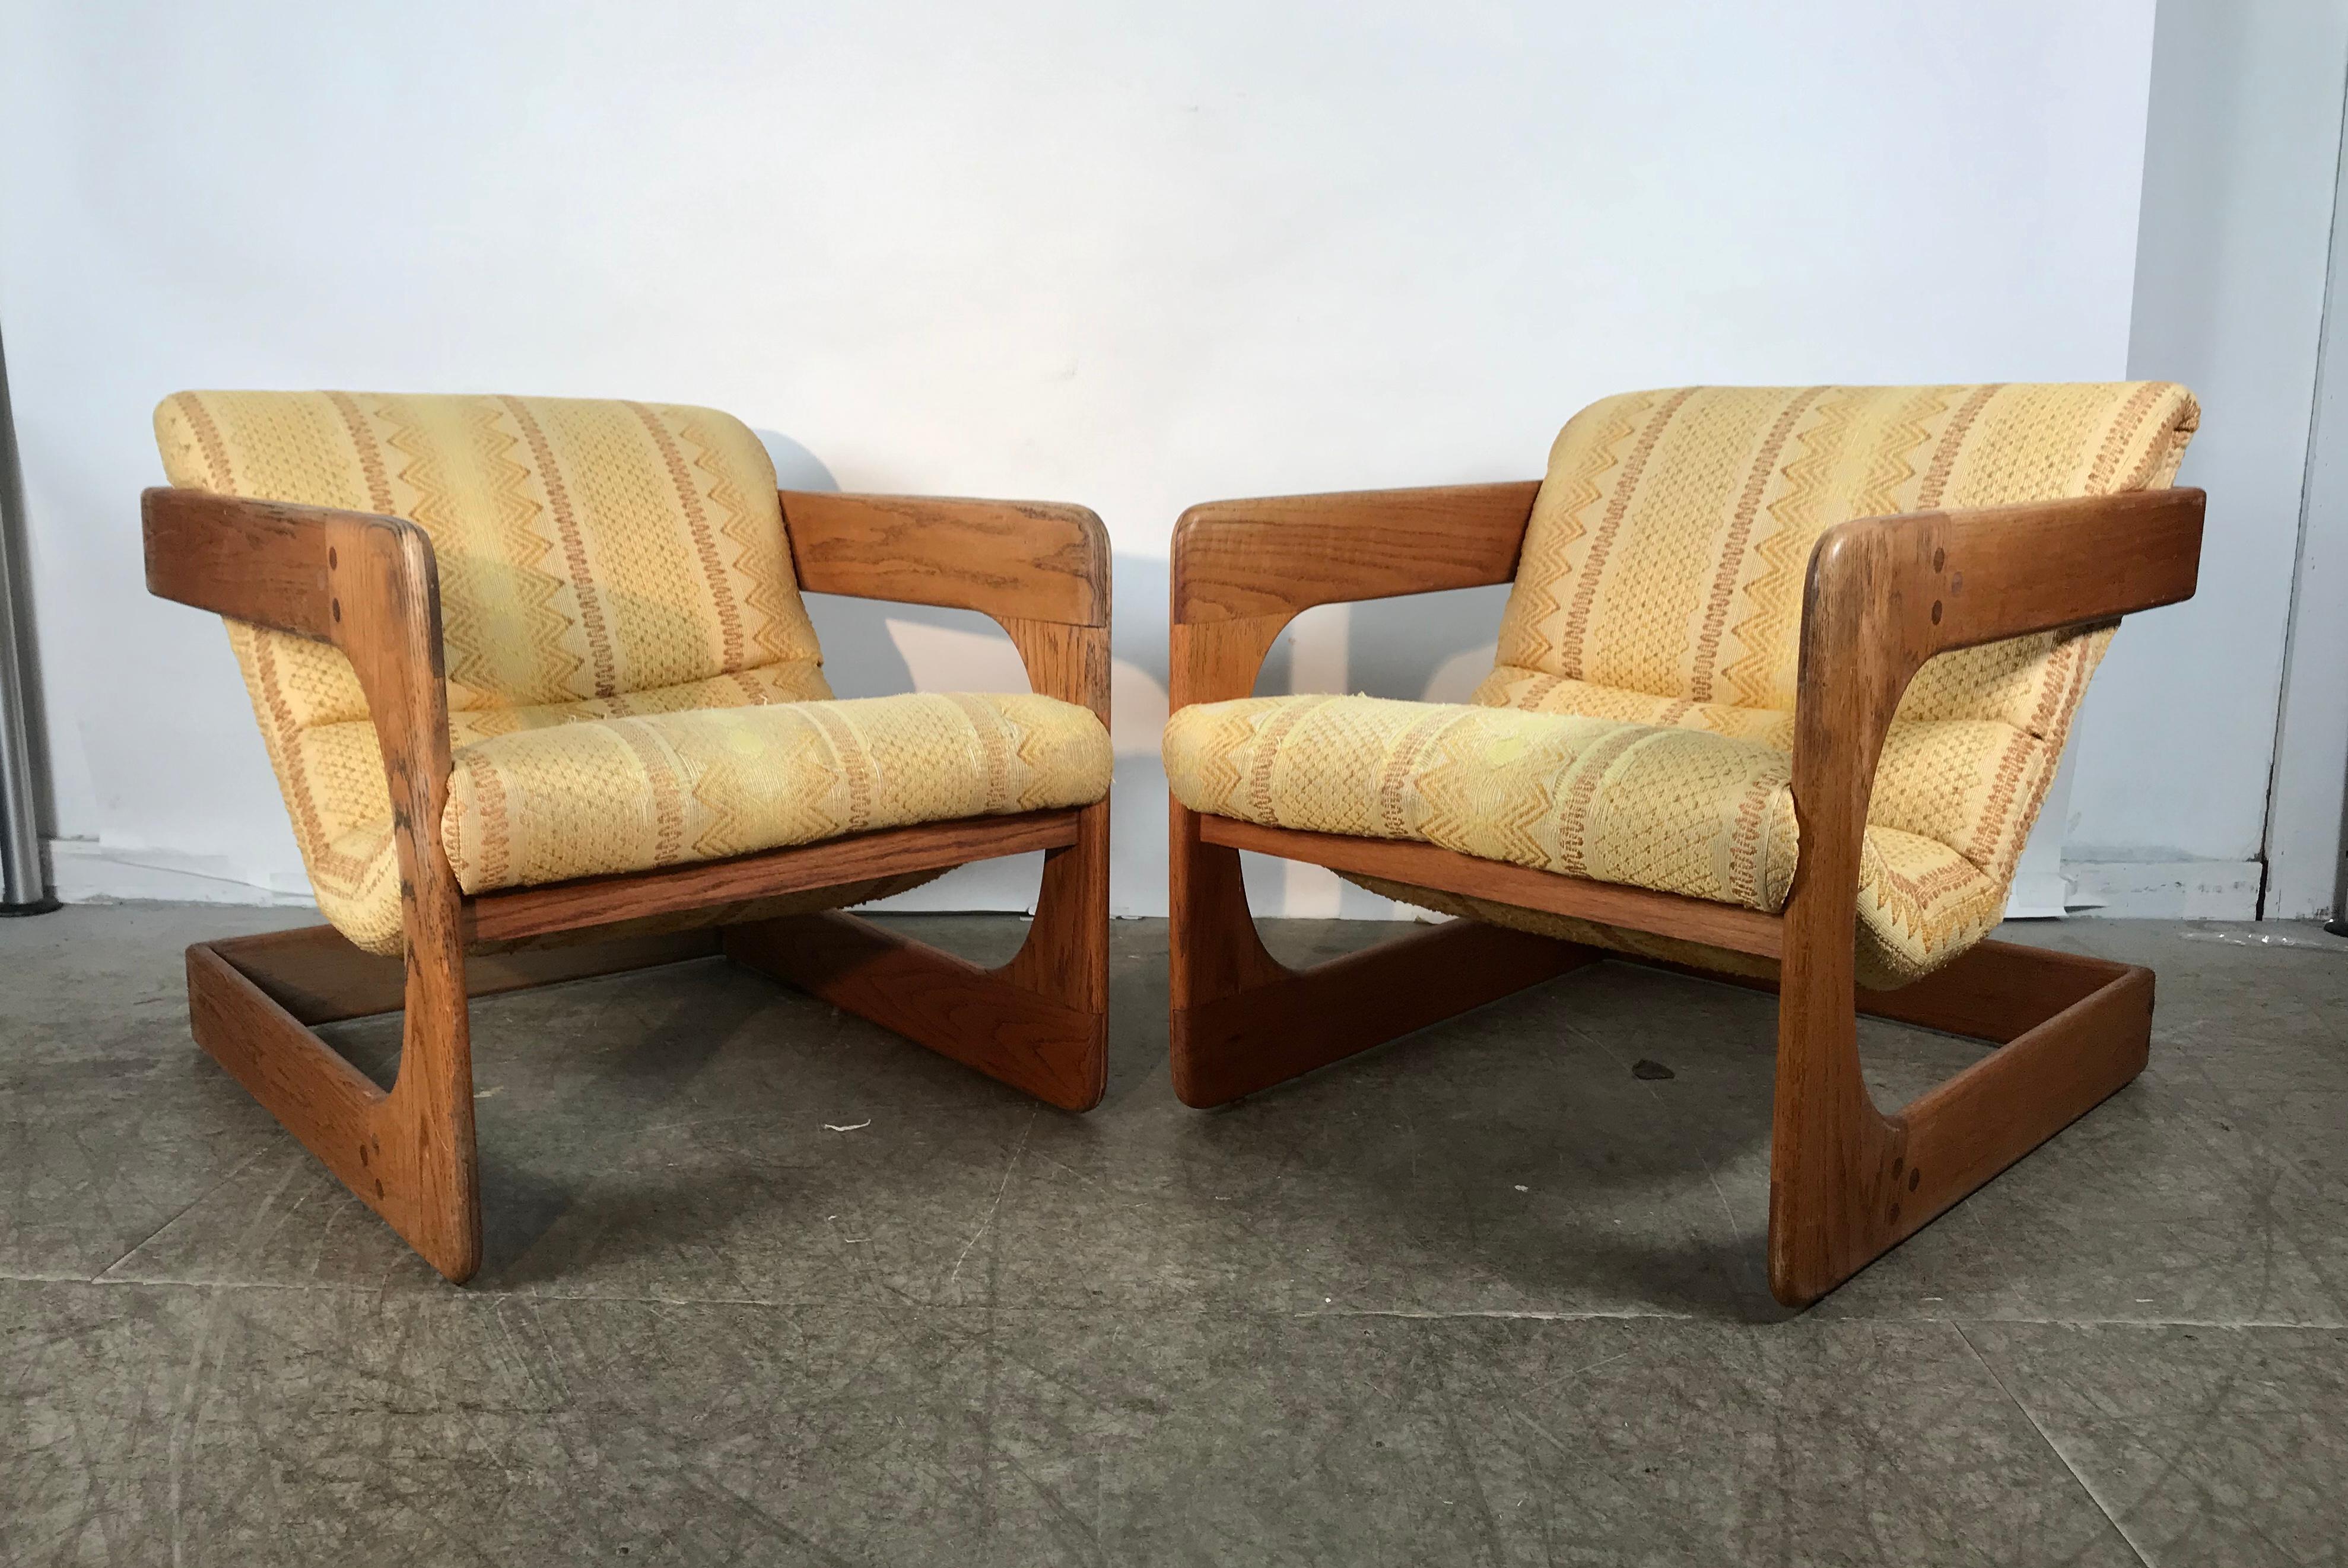 Fabric Classic 1970s Cantilvered Lounge Chairs by Lou Hodges, California Design Group